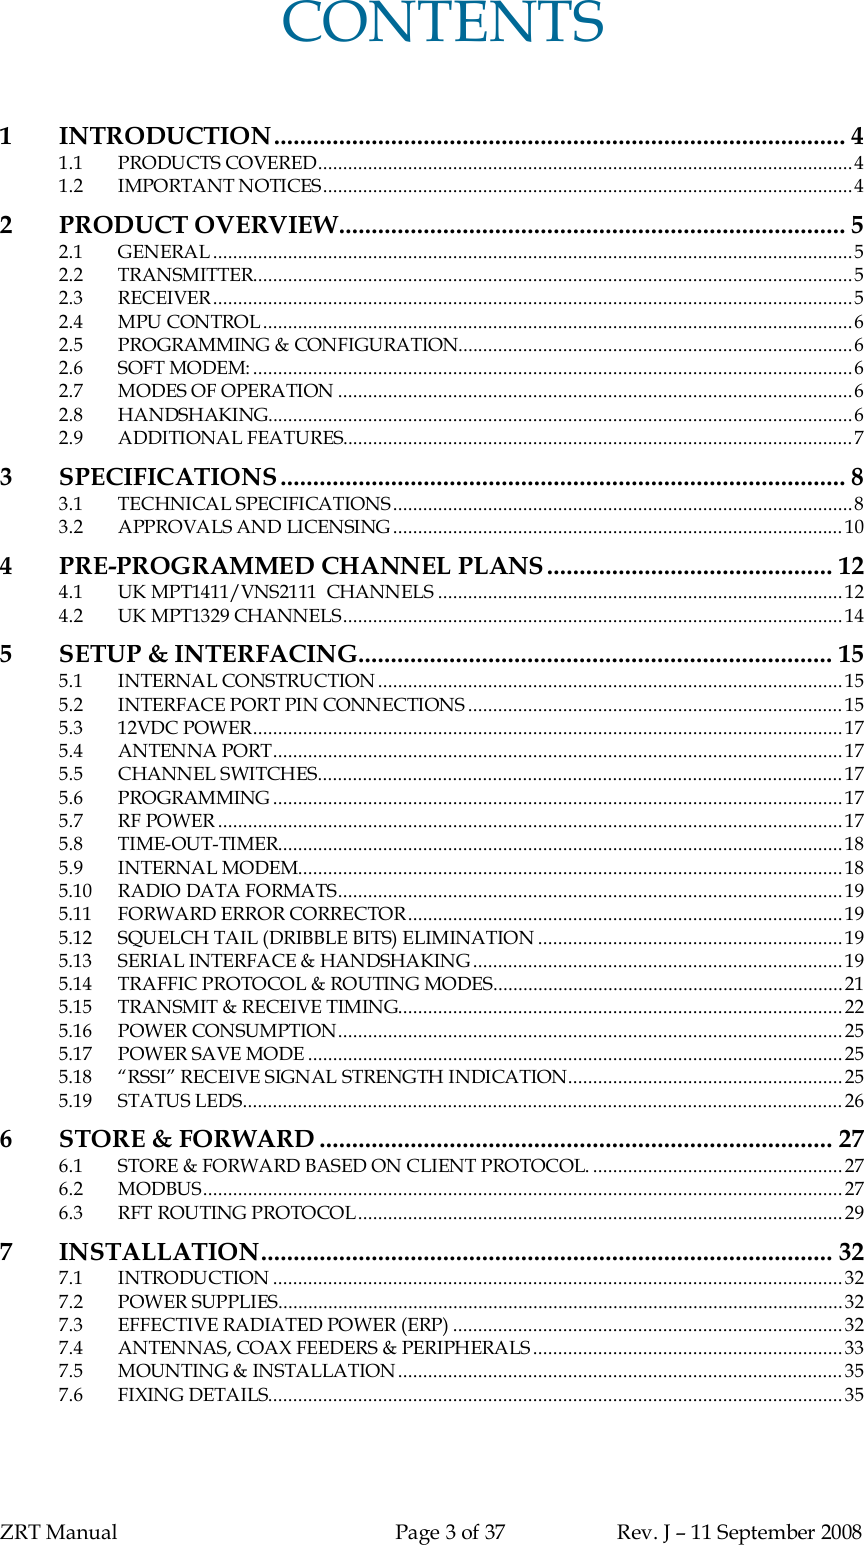 ZRT Manual Page 3 of 37 Rev. J – 11 September 2008CONTENTS1INTRODUCTION........................................................................................ 41.1 PRODUCTS COVERED...........................................................................................................41.2 IMPORTANT NOTICES..........................................................................................................42 PRODUCT OVERVIEW.............................................................................. 52.1 GENERAL ................................................................................................................................52.2 TRANSMITTER........................................................................................................................52.3 RECEIVER................................................................................................................................52.4 MPU CONTROL......................................................................................................................62.5 PROGRAMMING &amp; CONFIGURATION...............................................................................62.6 SOFT MODEM: ........................................................................................................................62.7 MODES OF OPERATION .......................................................................................................62.8 HANDSHAKING.....................................................................................................................62.9 ADDITIONAL FEATURES......................................................................................................73SPECIFICATIONS ....................................................................................... 83.1 TECHNICAL SPECIFICATIONS............................................................................................83.2 APPROVALS AND LICENSING..........................................................................................104PRE-PROGRAMMED CHANNEL PLANS............................................ 124.1 UK MPT1411/VNS2111  CHANNELS .................................................................................124.2 UK MPT1329 CHANNELS....................................................................................................145SETUP &amp; INTERFACING......................................................................... 155.1 INTERNAL CONSTRUCTION.............................................................................................155.2 INTERFACE PORT PIN CONNECTIONS ...........................................................................155.3 12VDC POWER......................................................................................................................175.4 ANTENNA PORT..................................................................................................................175.5 CHANNEL SWITCHES.........................................................................................................175.6 PROGRAMMING ..................................................................................................................175.7 RF POWER .............................................................................................................................175.8 TIME-OUT-TIMER.................................................................................................................185.9 INTERNAL MODEM.............................................................................................................185.10 RADIO DATA FORMATS.....................................................................................................195.11 FORWARD ERROR CORRECTOR.......................................................................................195.12 SQUELCH TAIL (DRIBBLE BITS) ELIMINATION .............................................................195.13 SERIAL INTERFACE &amp; HANDSHAKING..........................................................................195.14 TRAFFIC PROTOCOL &amp; ROUTING MODES......................................................................215.15 TRANSMIT &amp; RECEIVE TIMING.........................................................................................225.16 POWER CONSUMPTION.....................................................................................................255.17 POWER SAVE MODE ........................................................................................................... 255.18 “RSSI” RECEIVE SIGNAL STRENGTH INDICATION.......................................................255.19 STATUS LEDS........................................................................................................................ 266STORE &amp; FORWARD ............................................................................... 276.1 STORE &amp; FORWARD BASED ON CLIENT PROTOCOL. .................................................. 276.2 MODBUS................................................................................................................................276.3 RFT ROUTING PROTOCOL.................................................................................................297 INSTALLATION........................................................................................ 327.1 INTRODUCTION ..................................................................................................................327.2 POWER SUPPLIES.................................................................................................................327.3 EFFECTIVE RADIATED POWER (ERP) .............................................................................. 327.4 ANTENNAS, COAX FEEDERS &amp; PERIPHERALS..............................................................337.5 MOUNTING &amp; INSTALLATION.........................................................................................357.6 FIXING DETAILS...................................................................................................................35